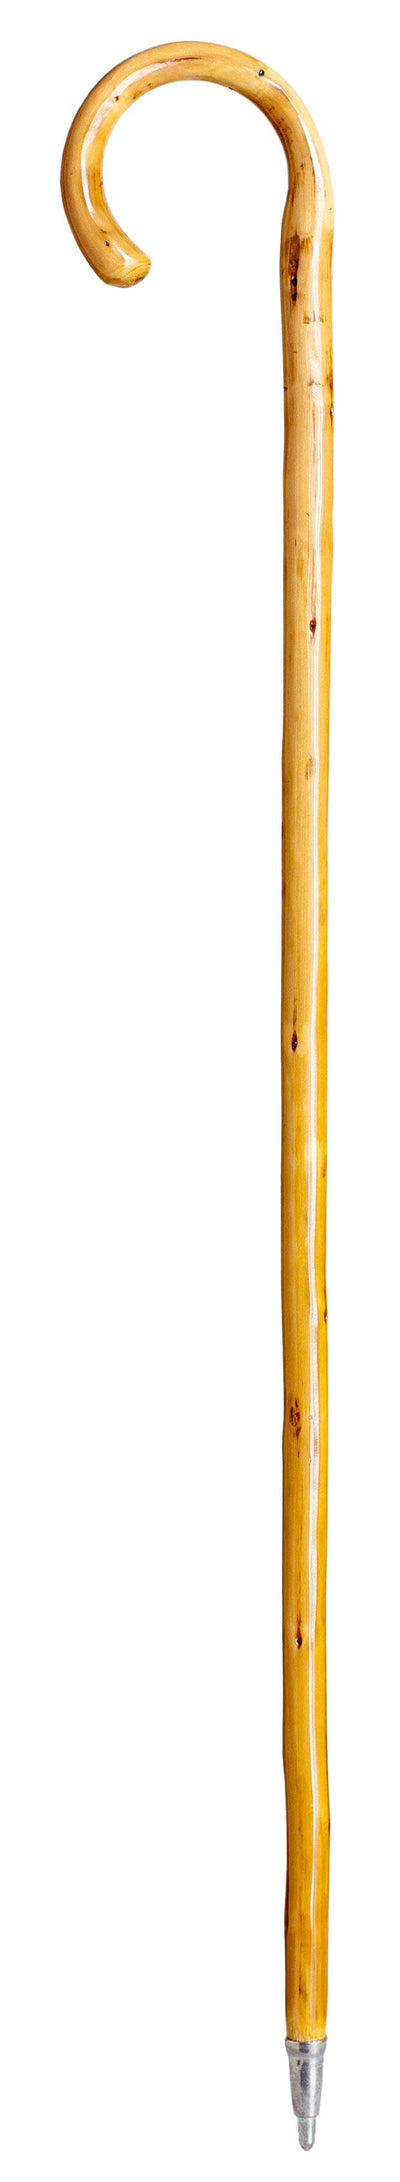 Trekking Stick in Chestnut Wood with Curved Handle - Light Brown